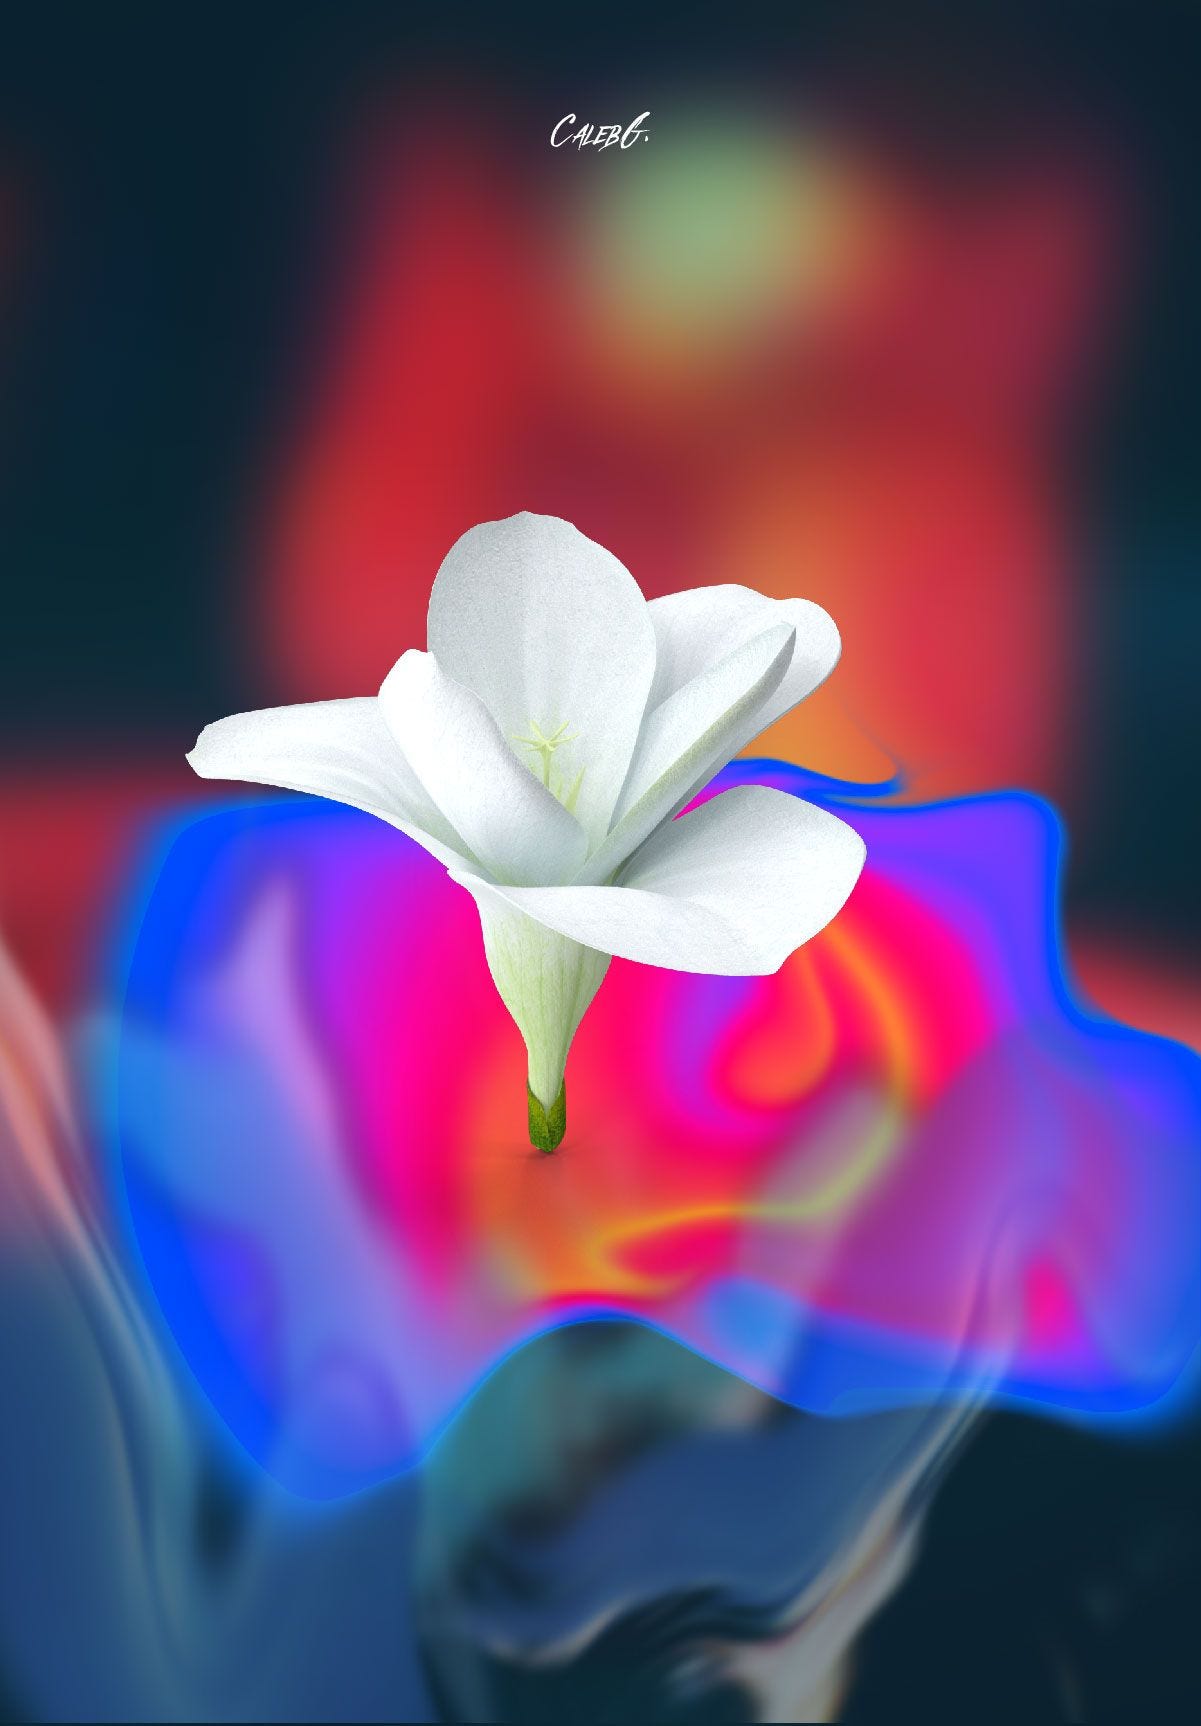 A digital artwork of a white flower with a multicolor smokey background.